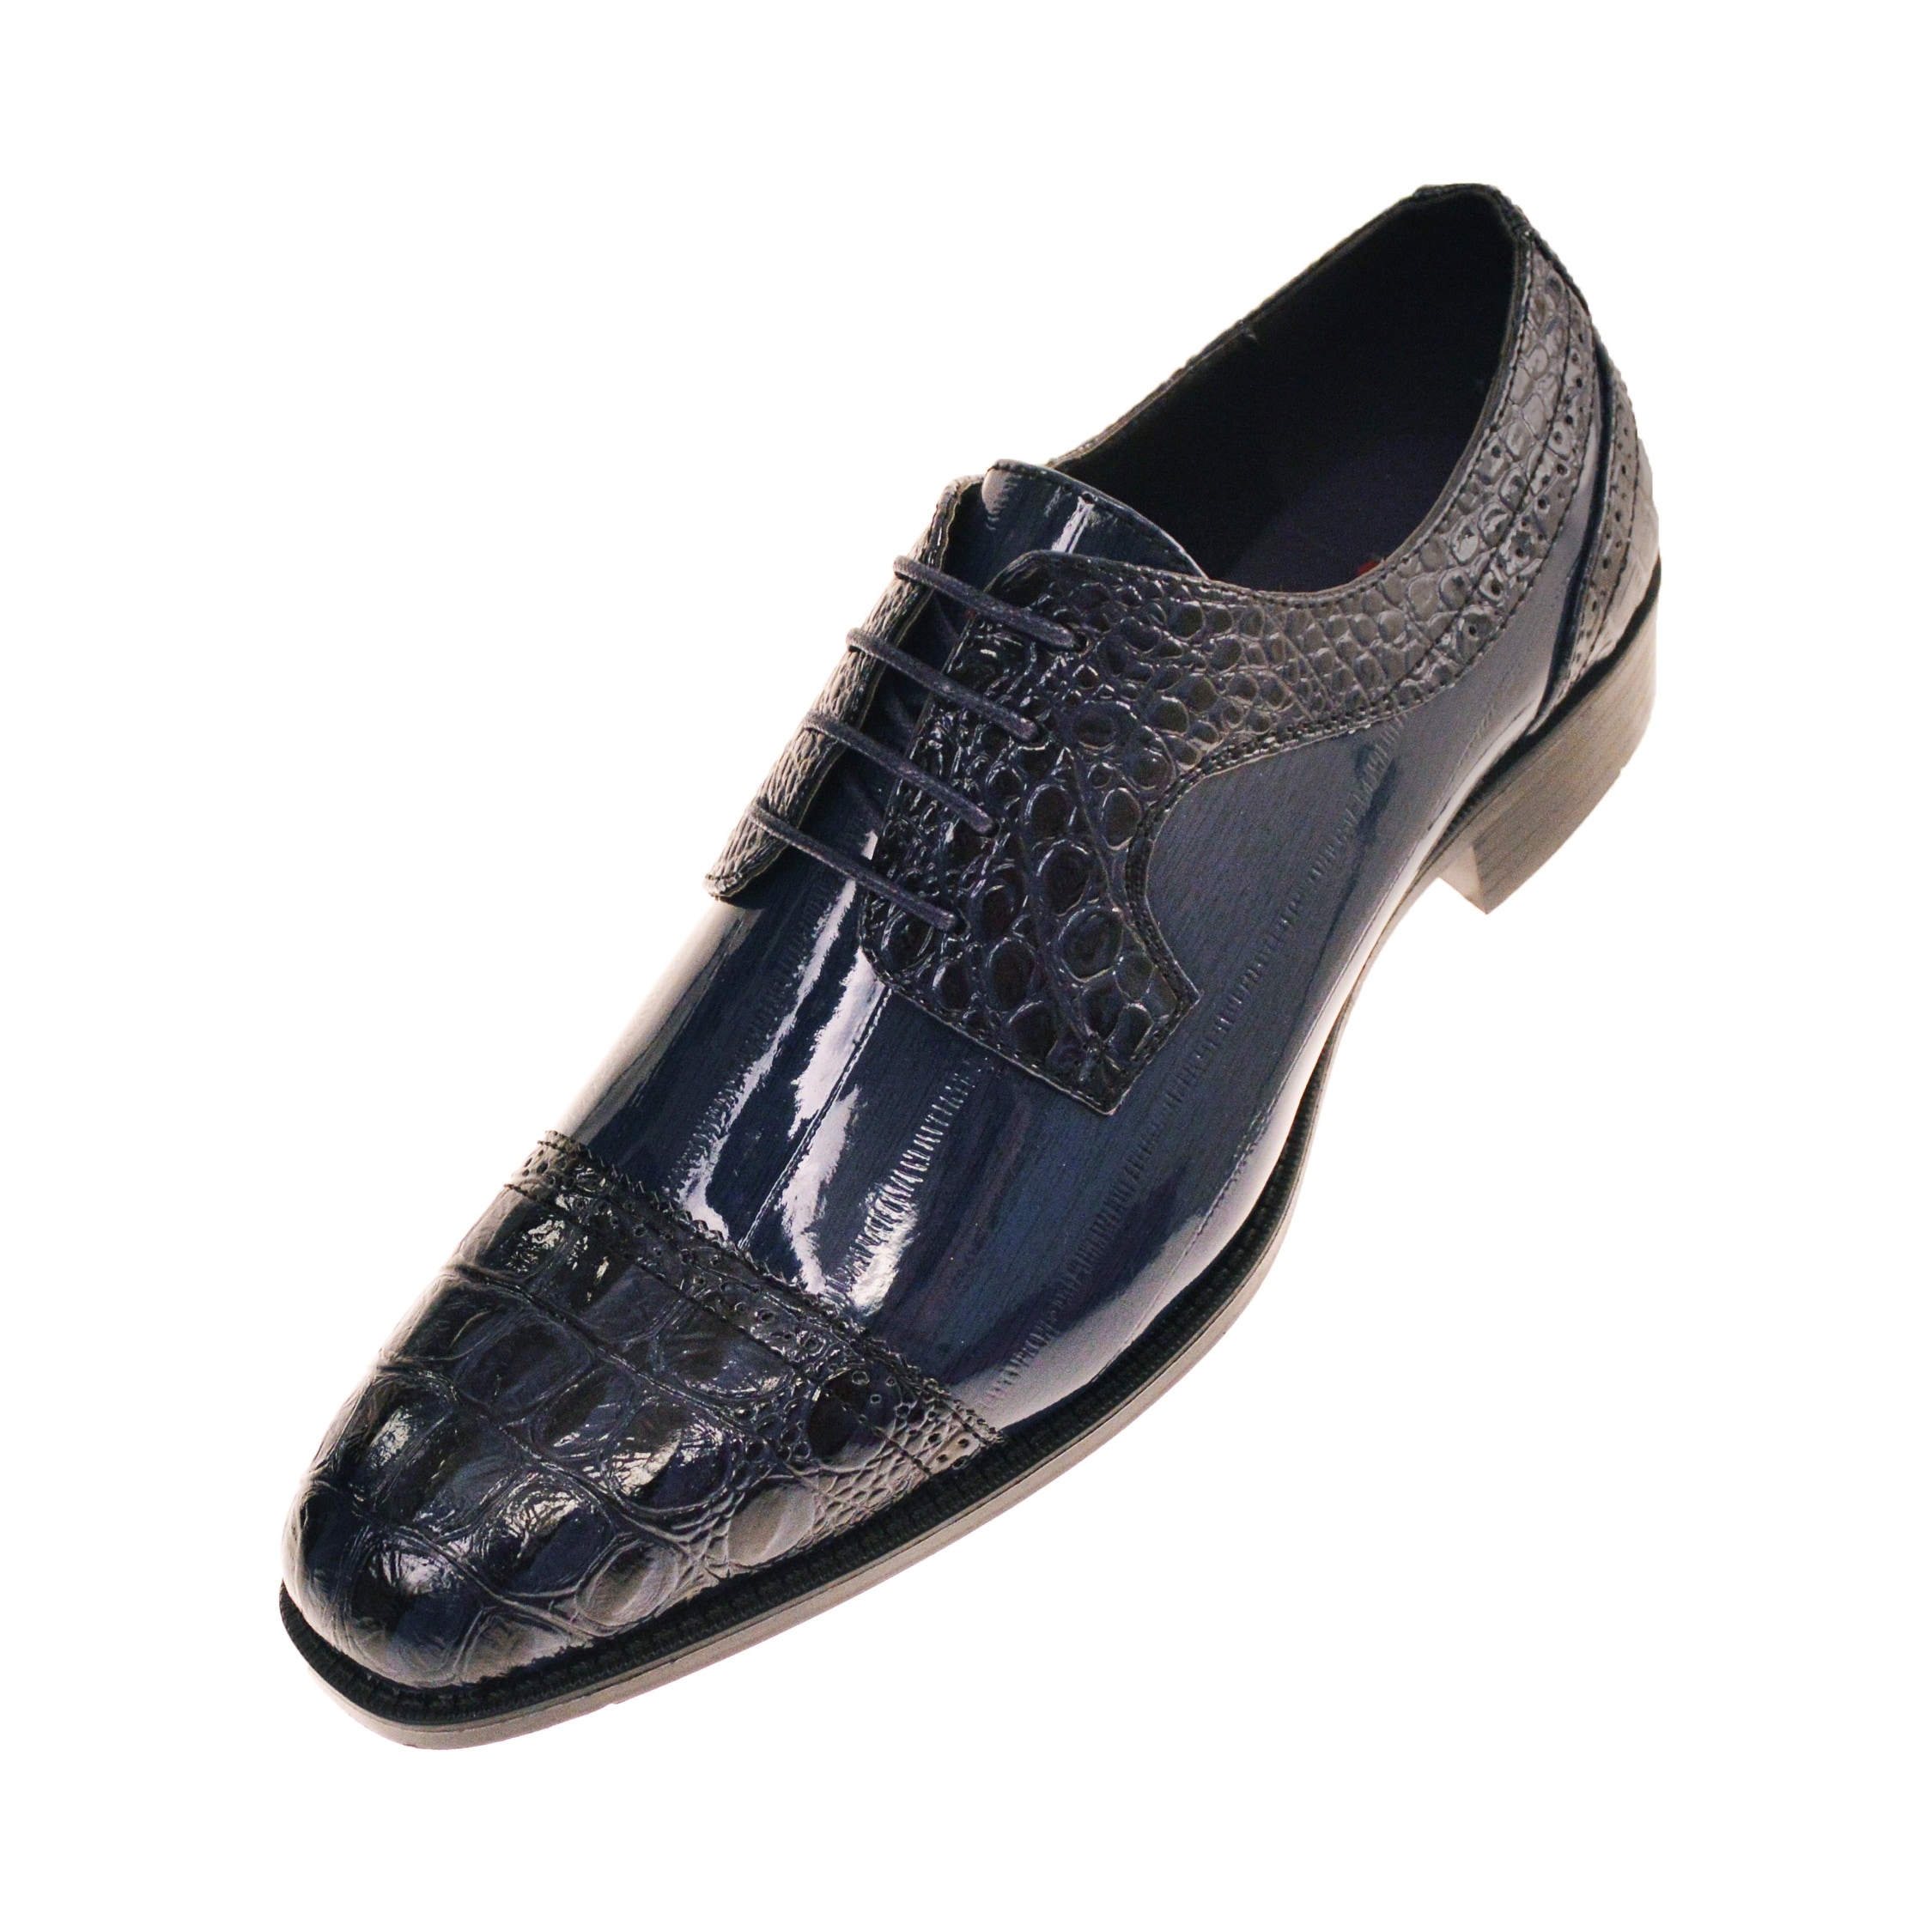 Bolano Mens Exotic Oxford Dress Shoes 